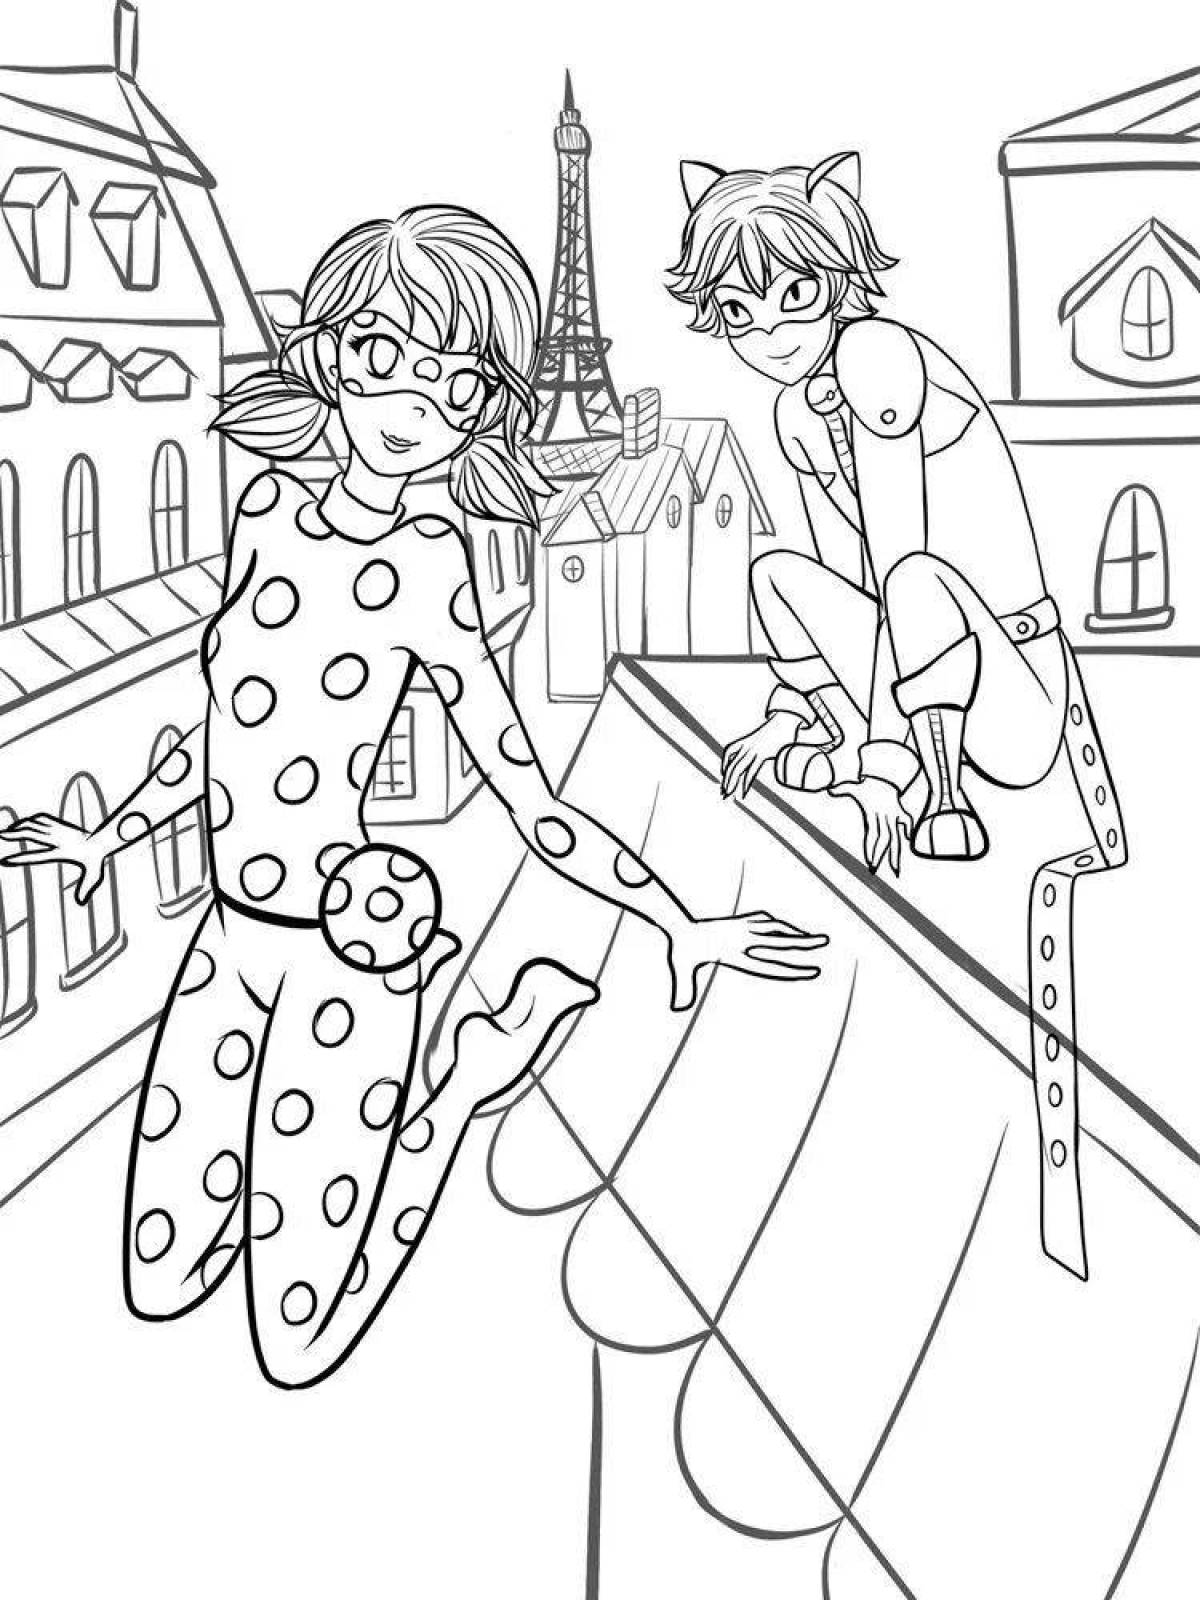 Pretty lady bug coloring page